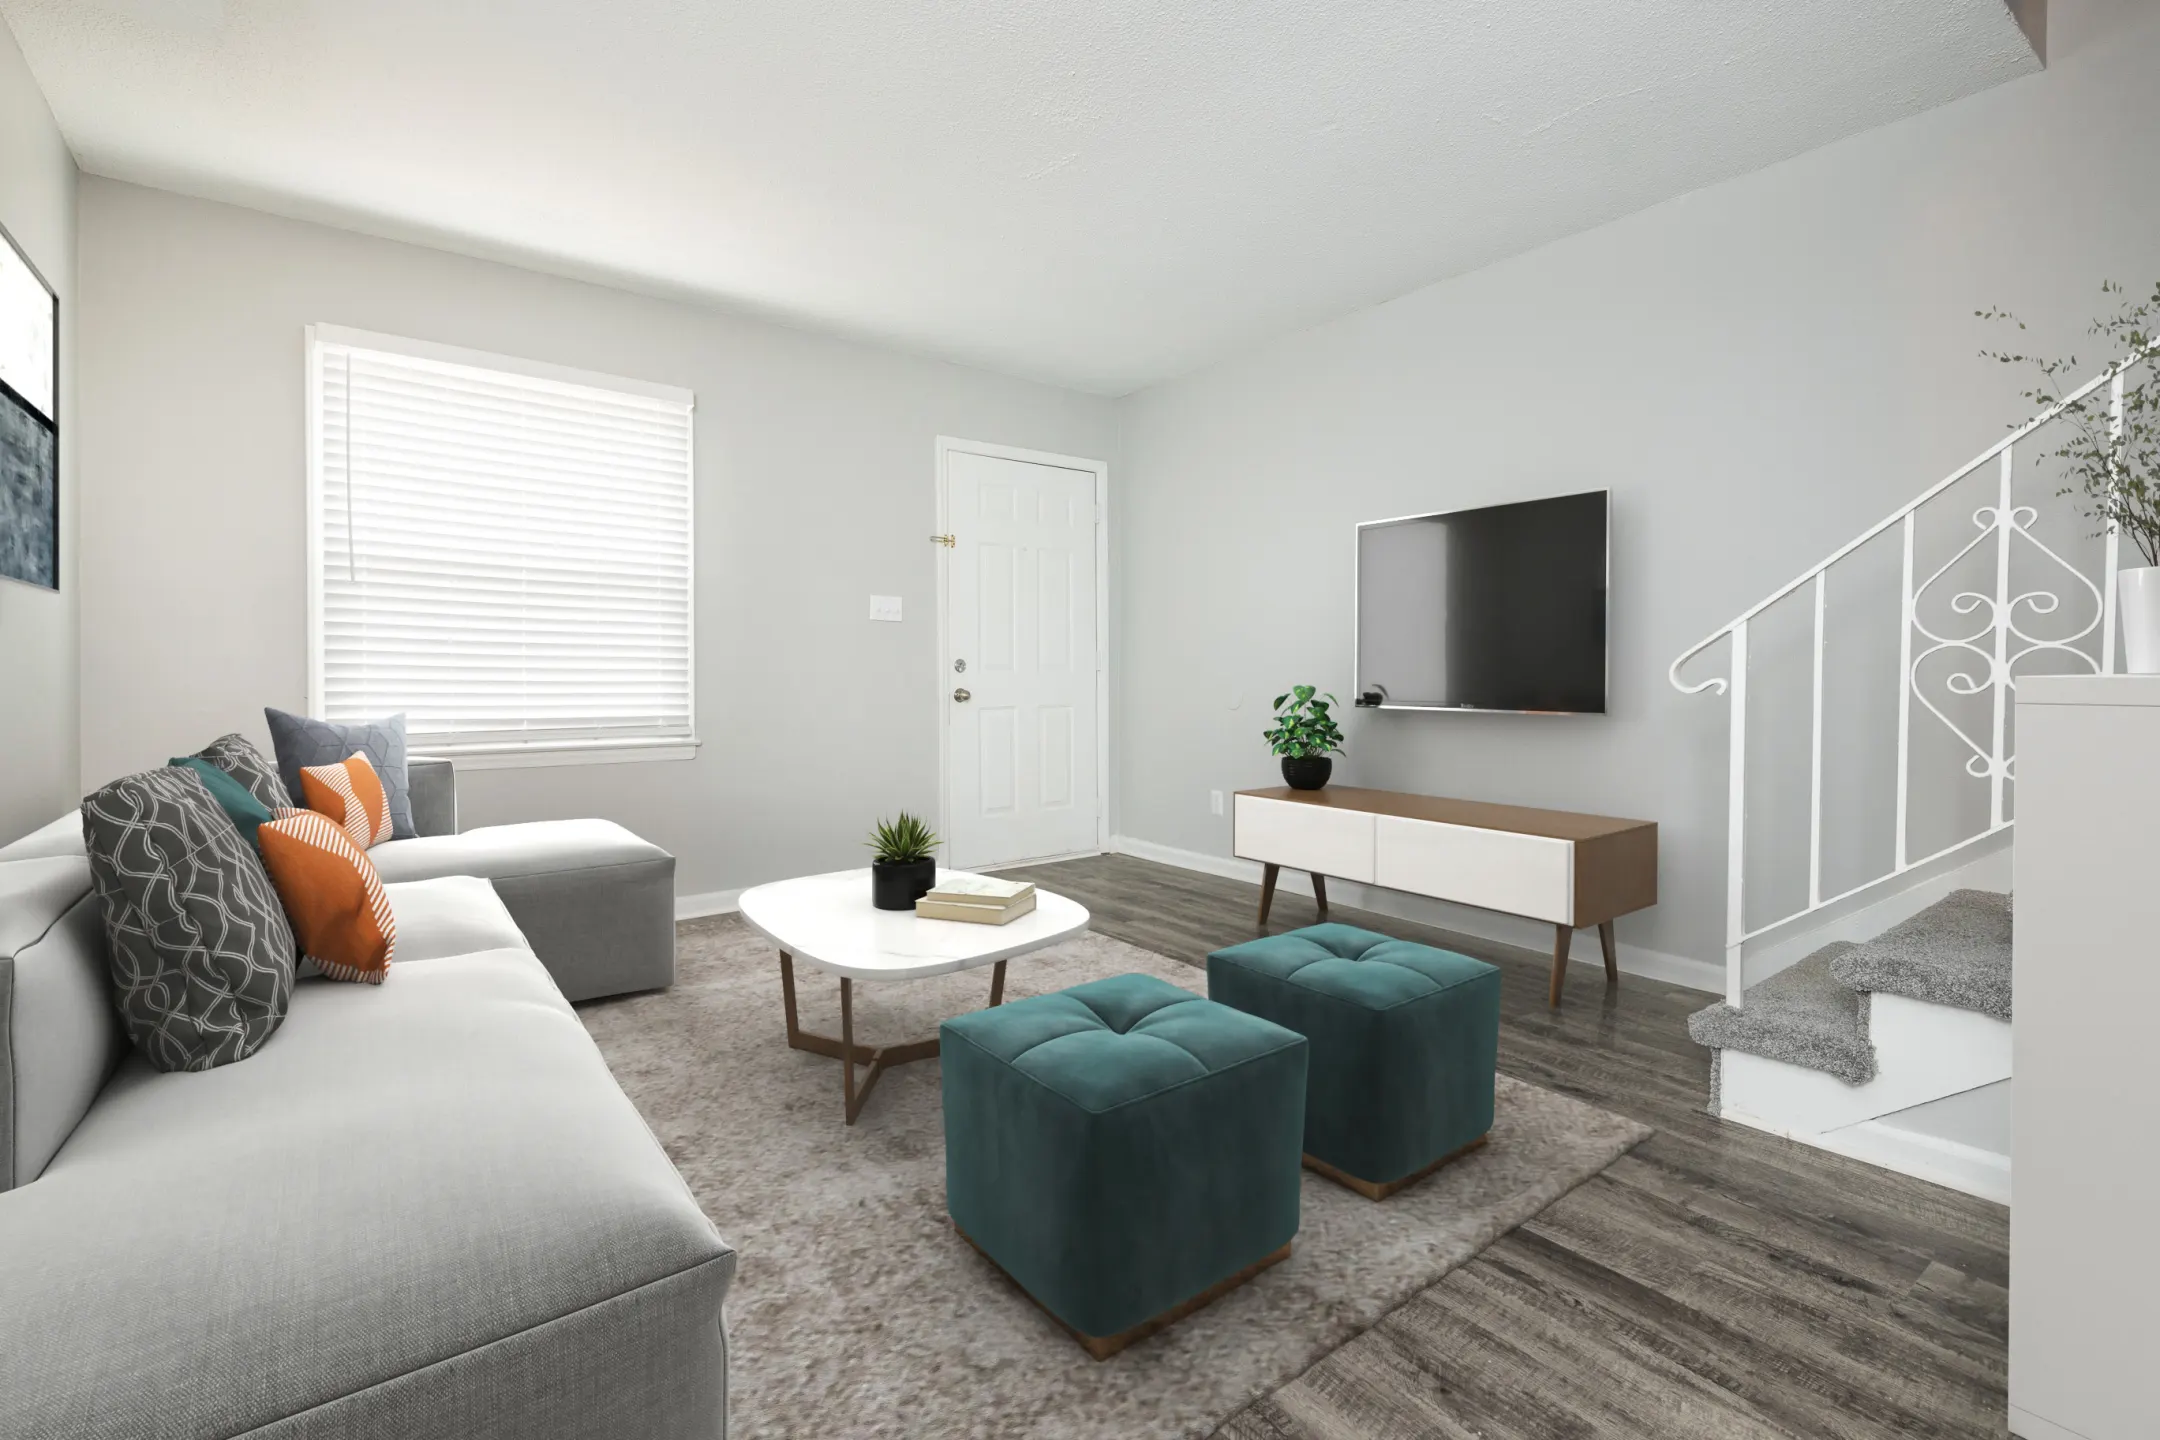 Living Room - Sage Pointe Apartments & Townhomes - Charlotte, NC